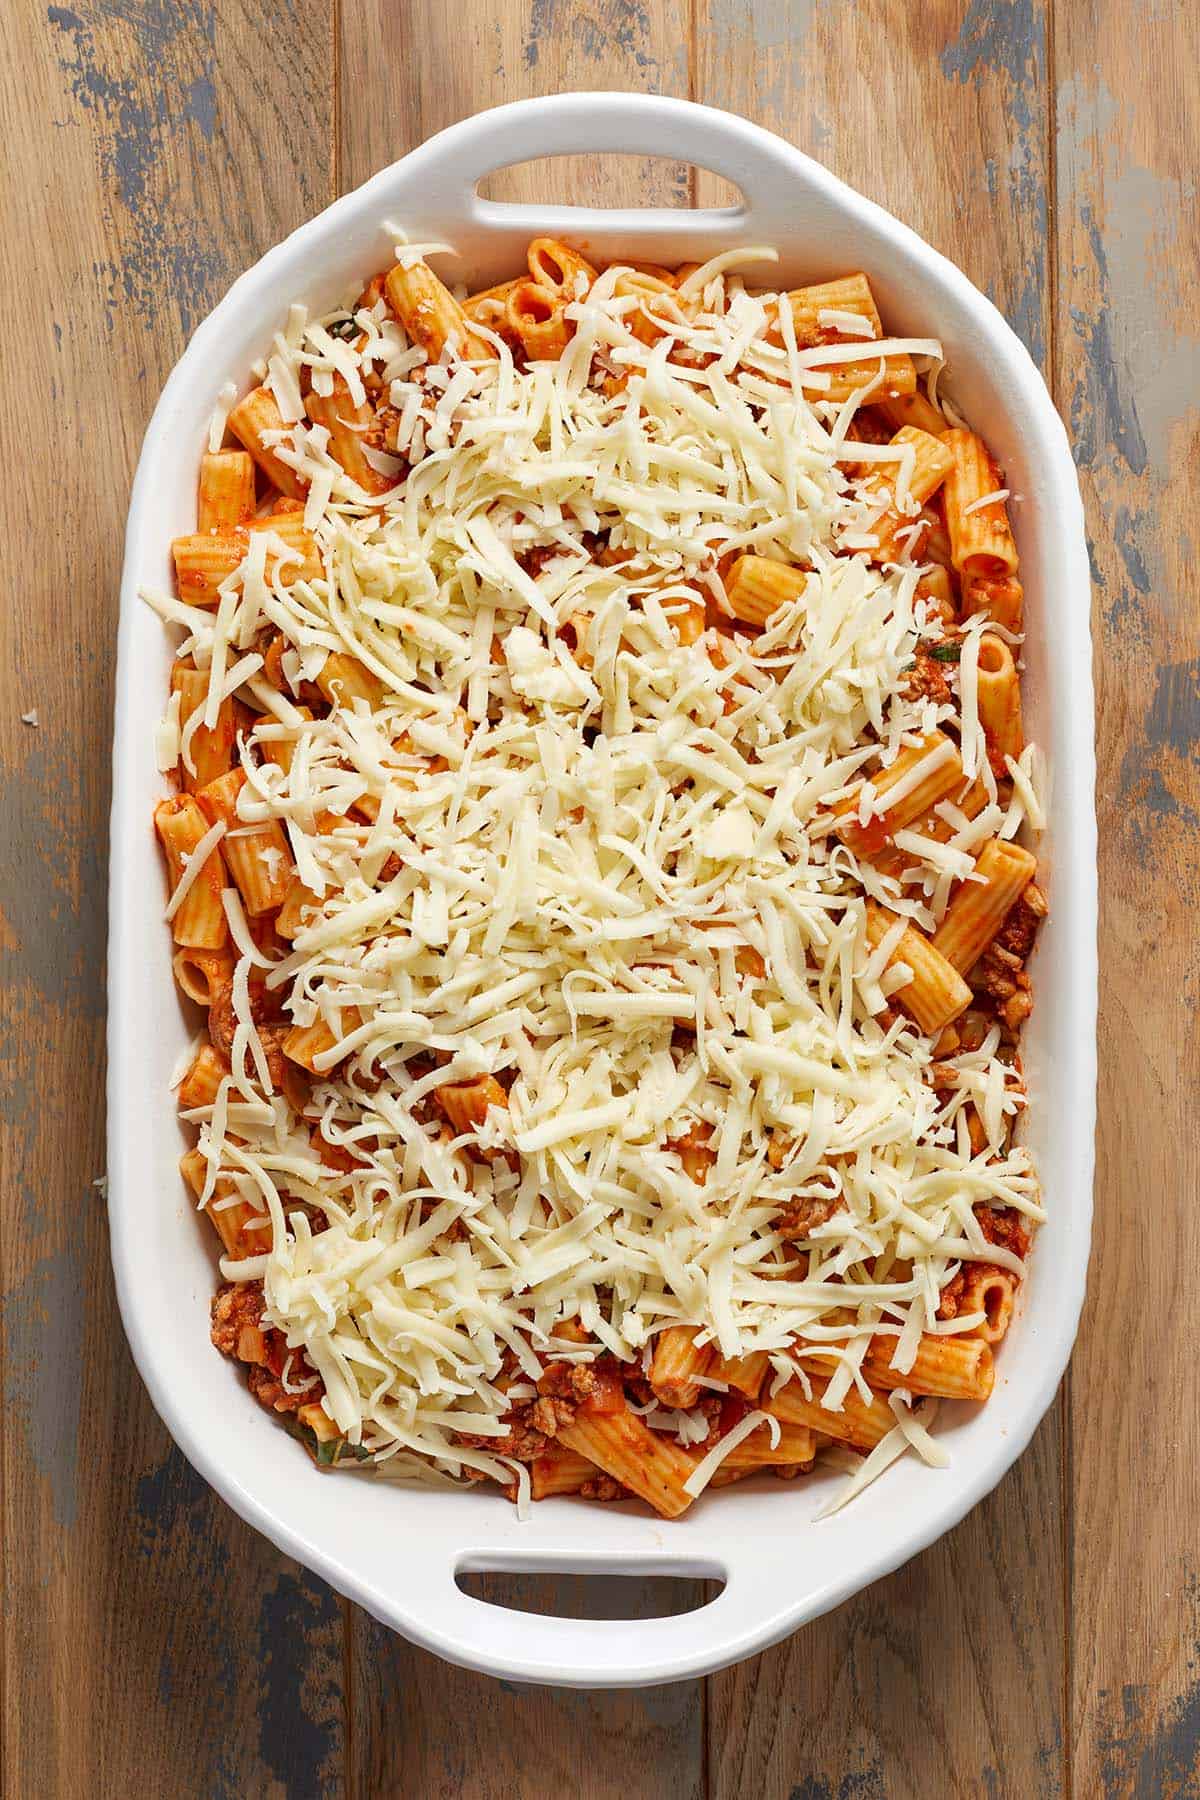 Rigatoni pasta covered in sauce and shredded cheese in a white baking dish on a wooden surface